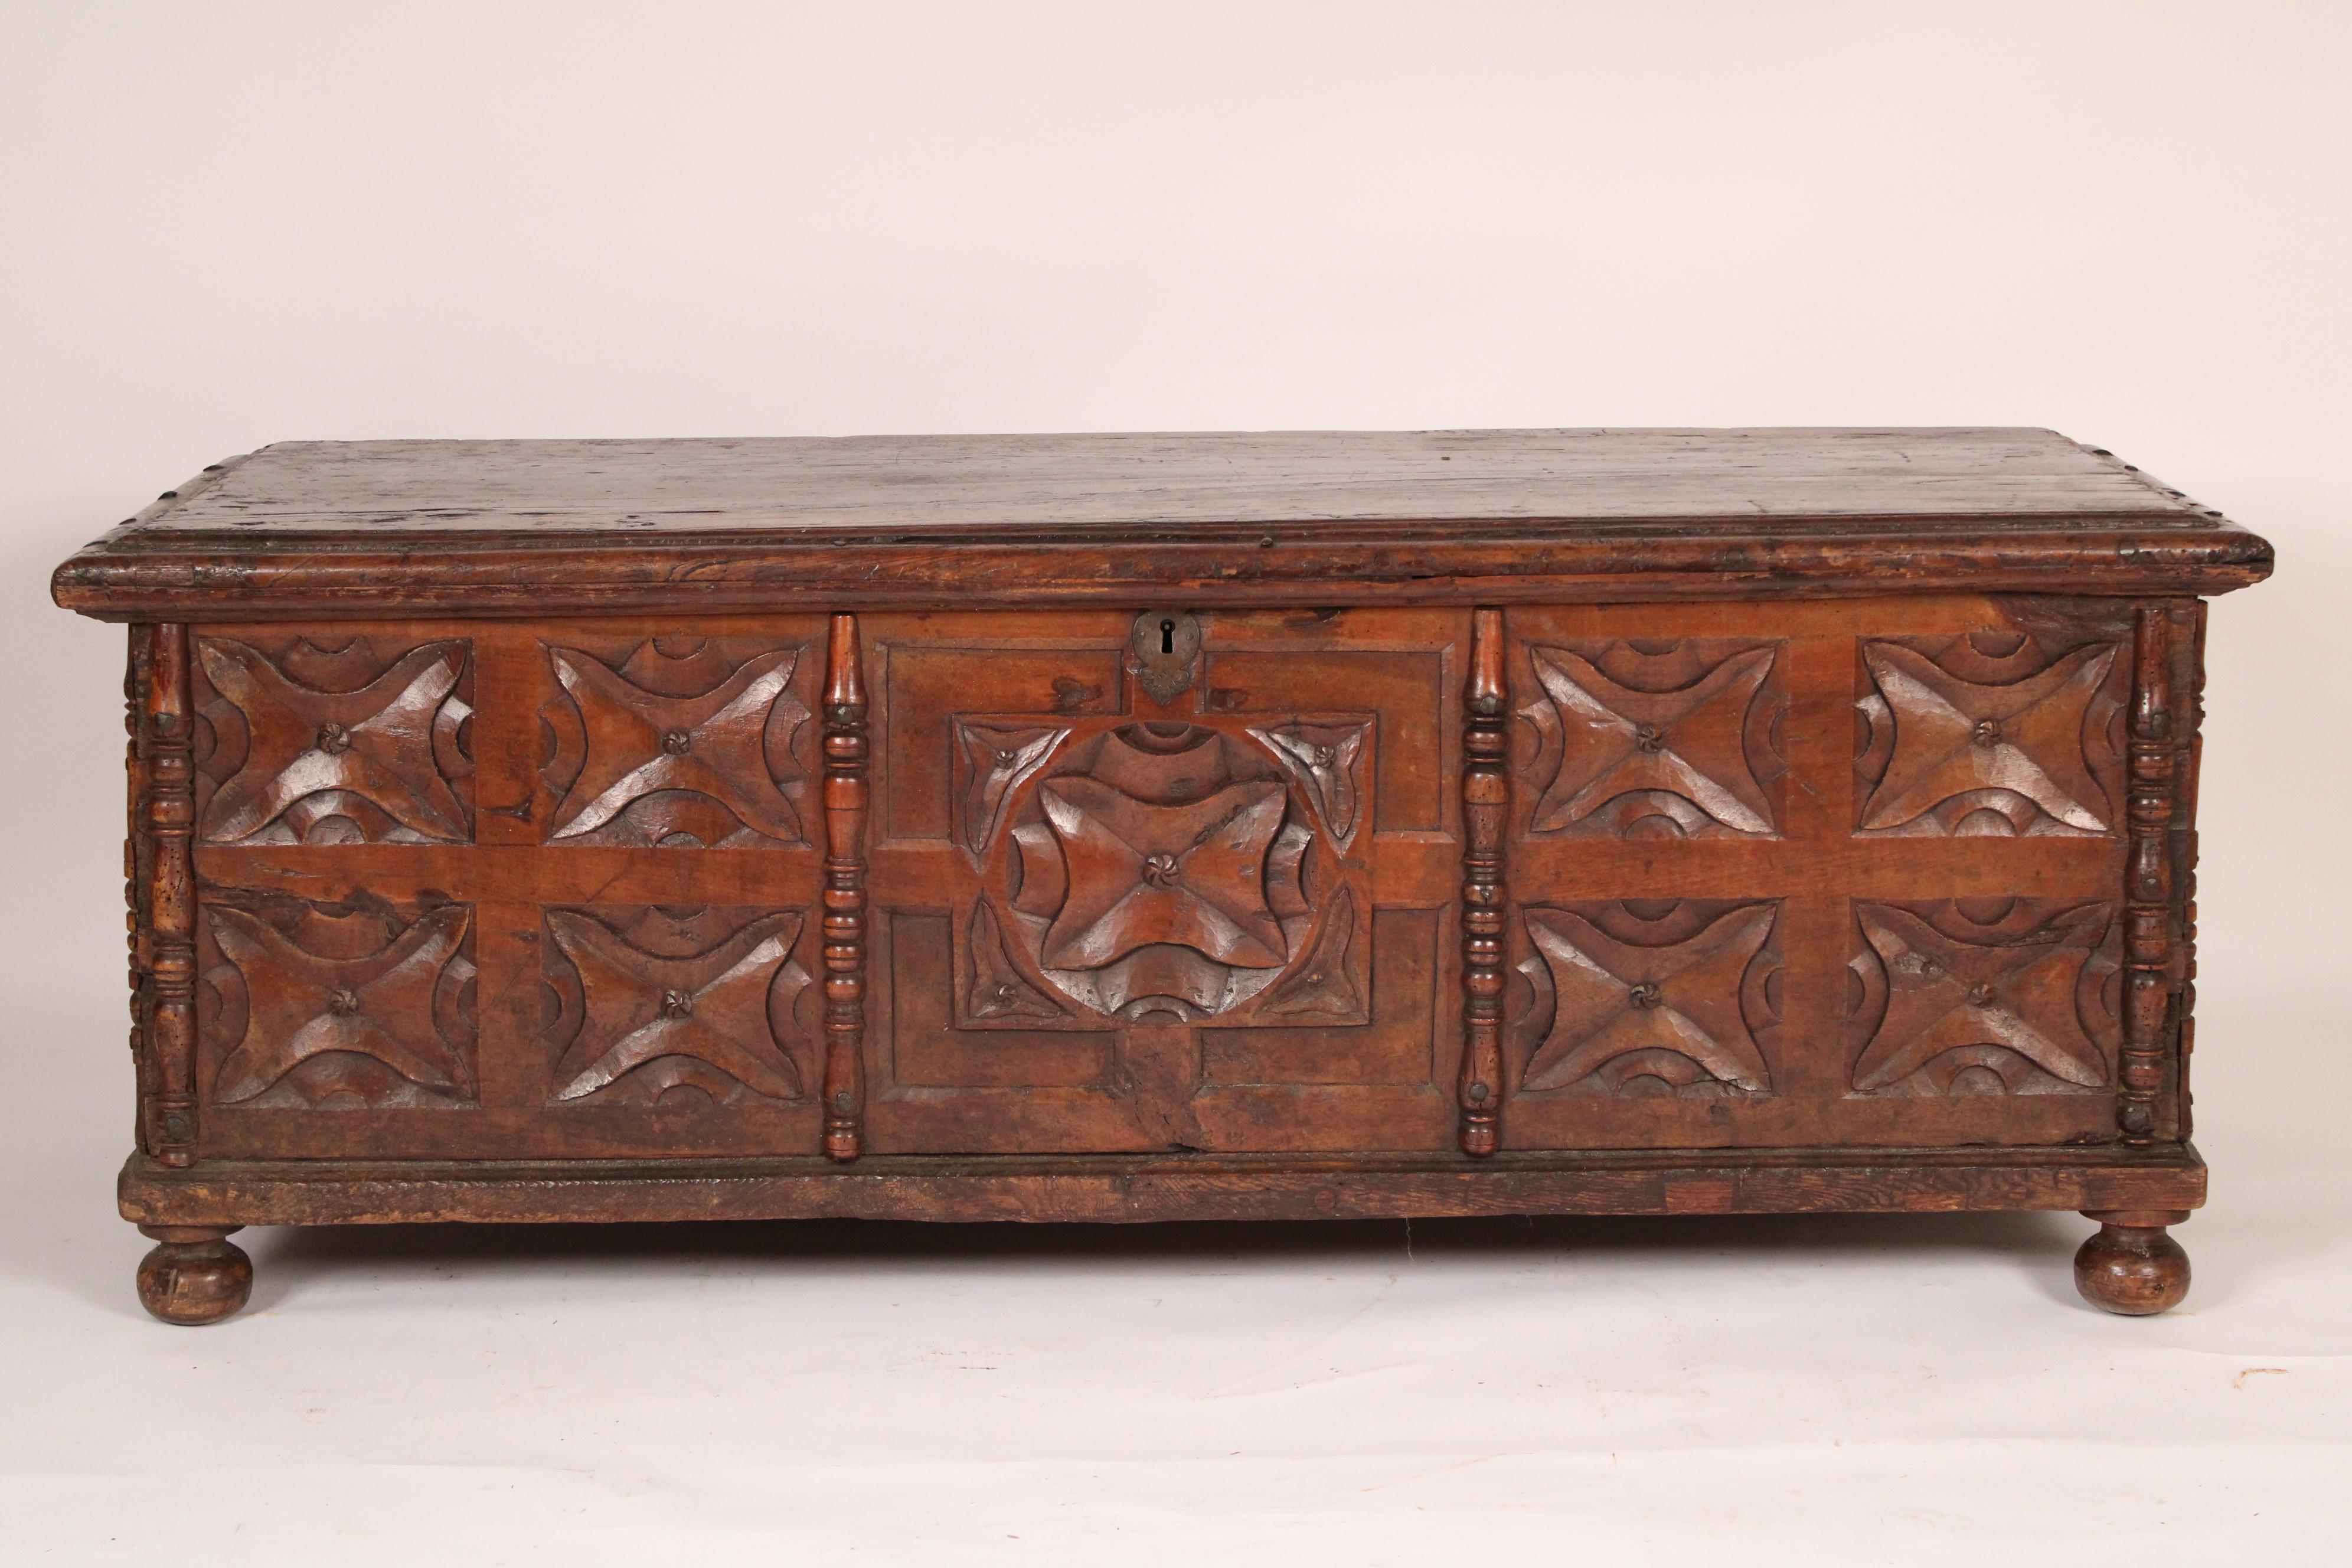 Continental baroque style oak trunk, circa early 19th century. With a single board rectangular overhanging top with molded front and side edges, the front with a central carved panel flanked by 4 carved panels on either side, resting on later bun